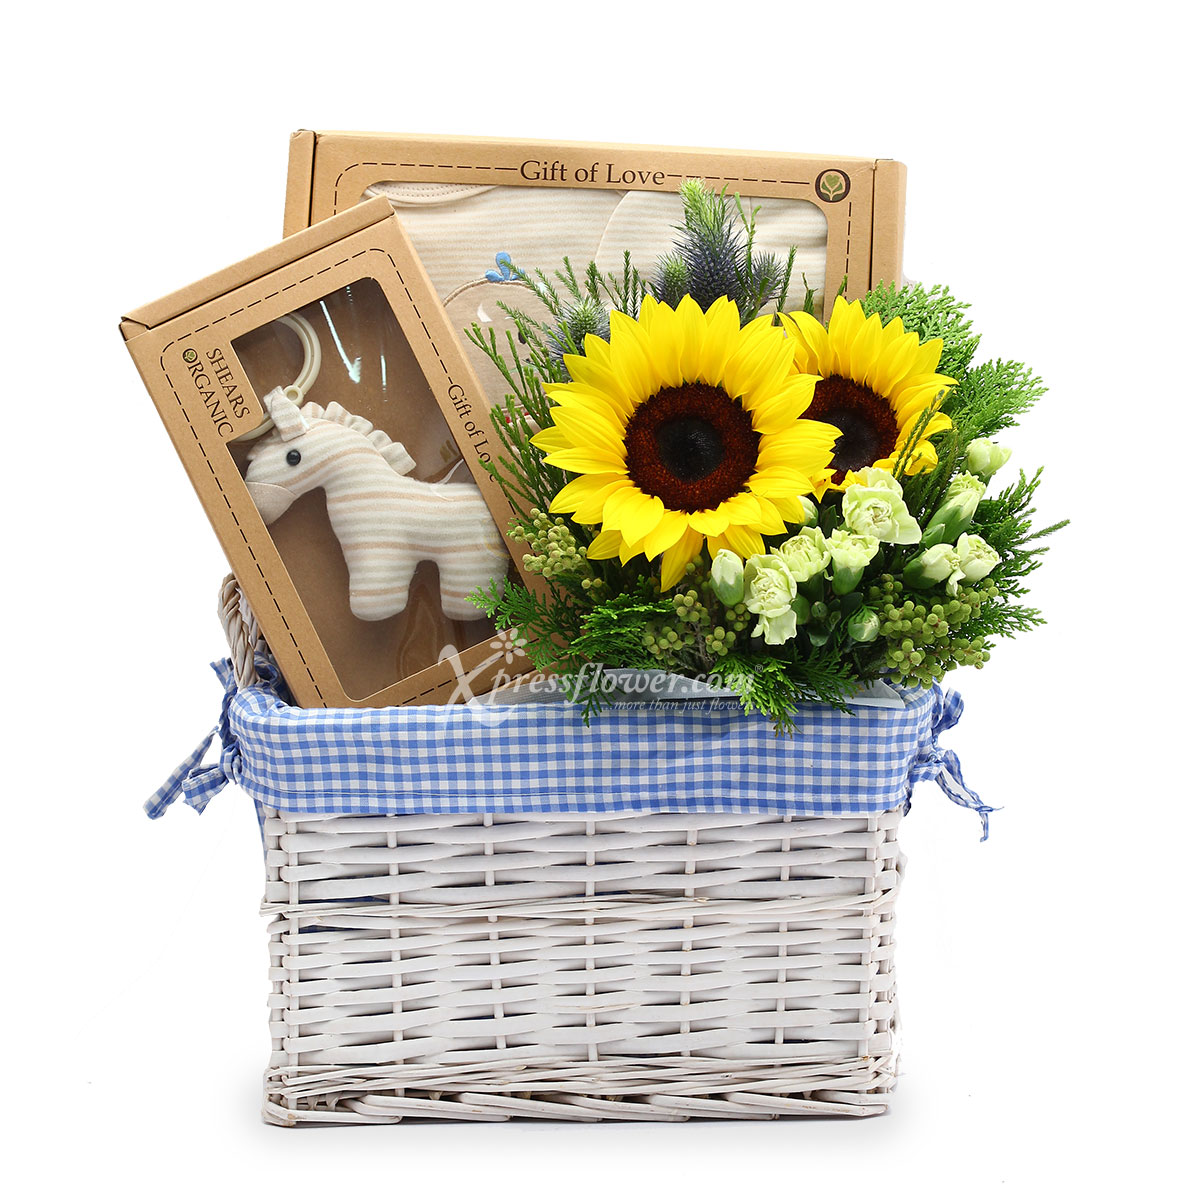 Sweet Little Blessing (2 Sunflowers with Newborn Baby Hamper)